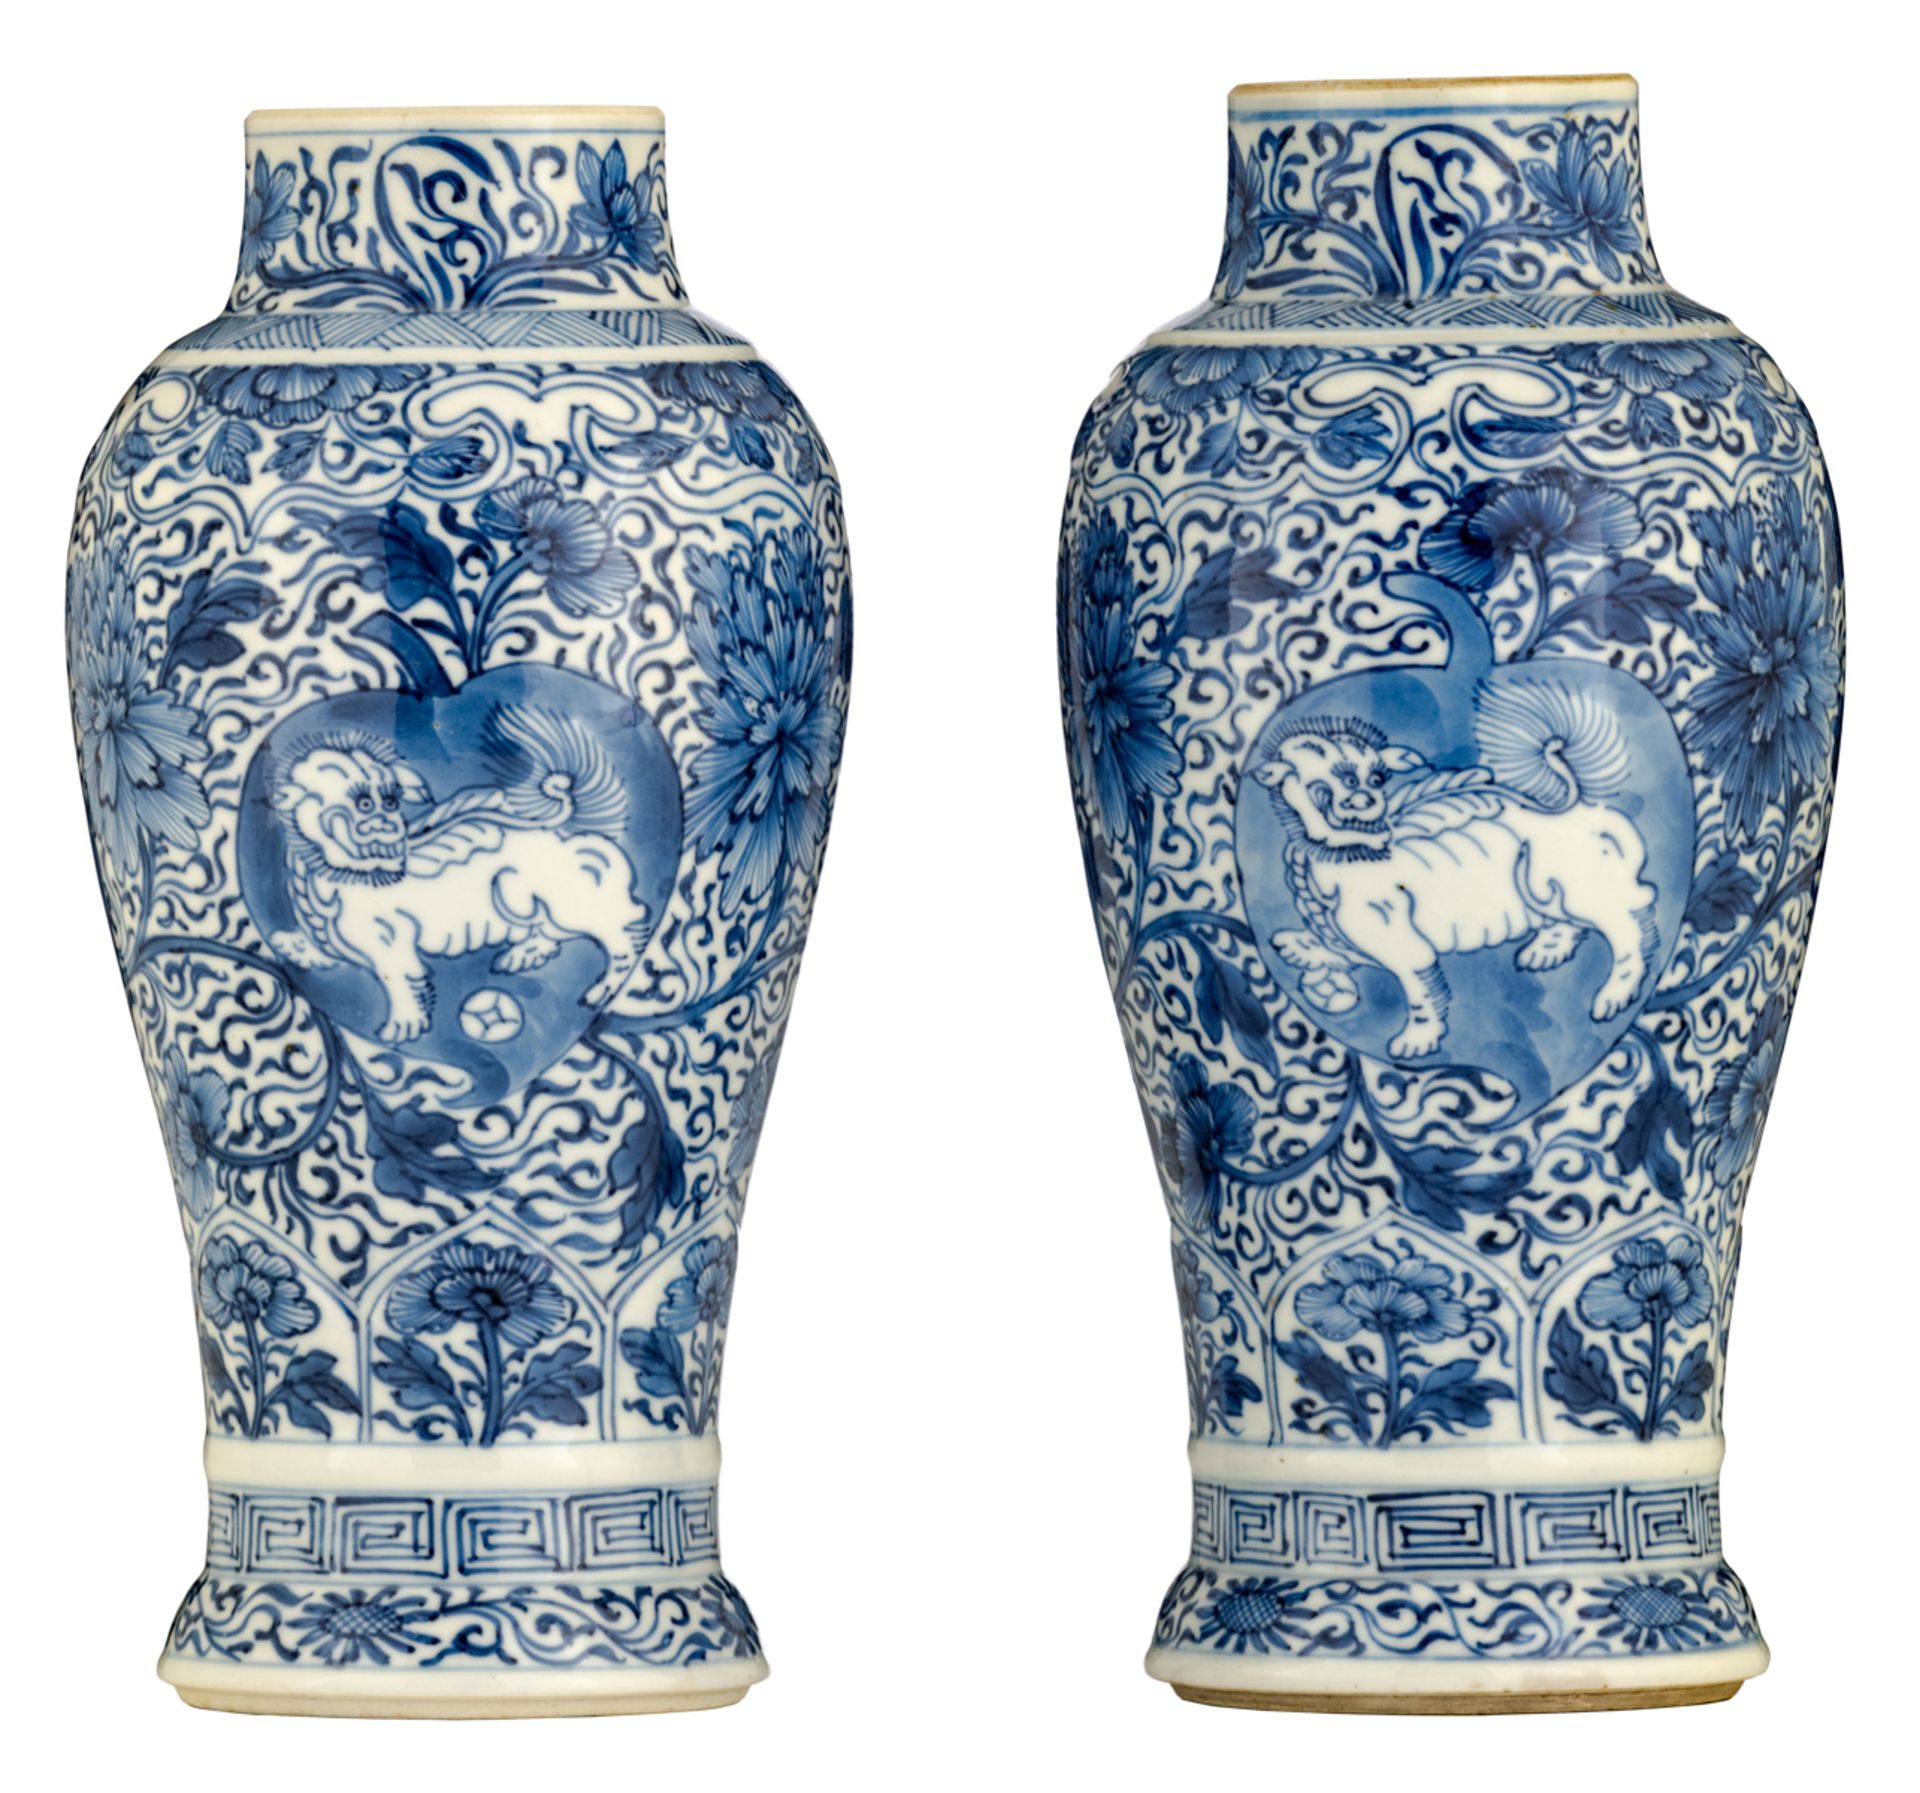 A pair of blue and white floral decorated vases